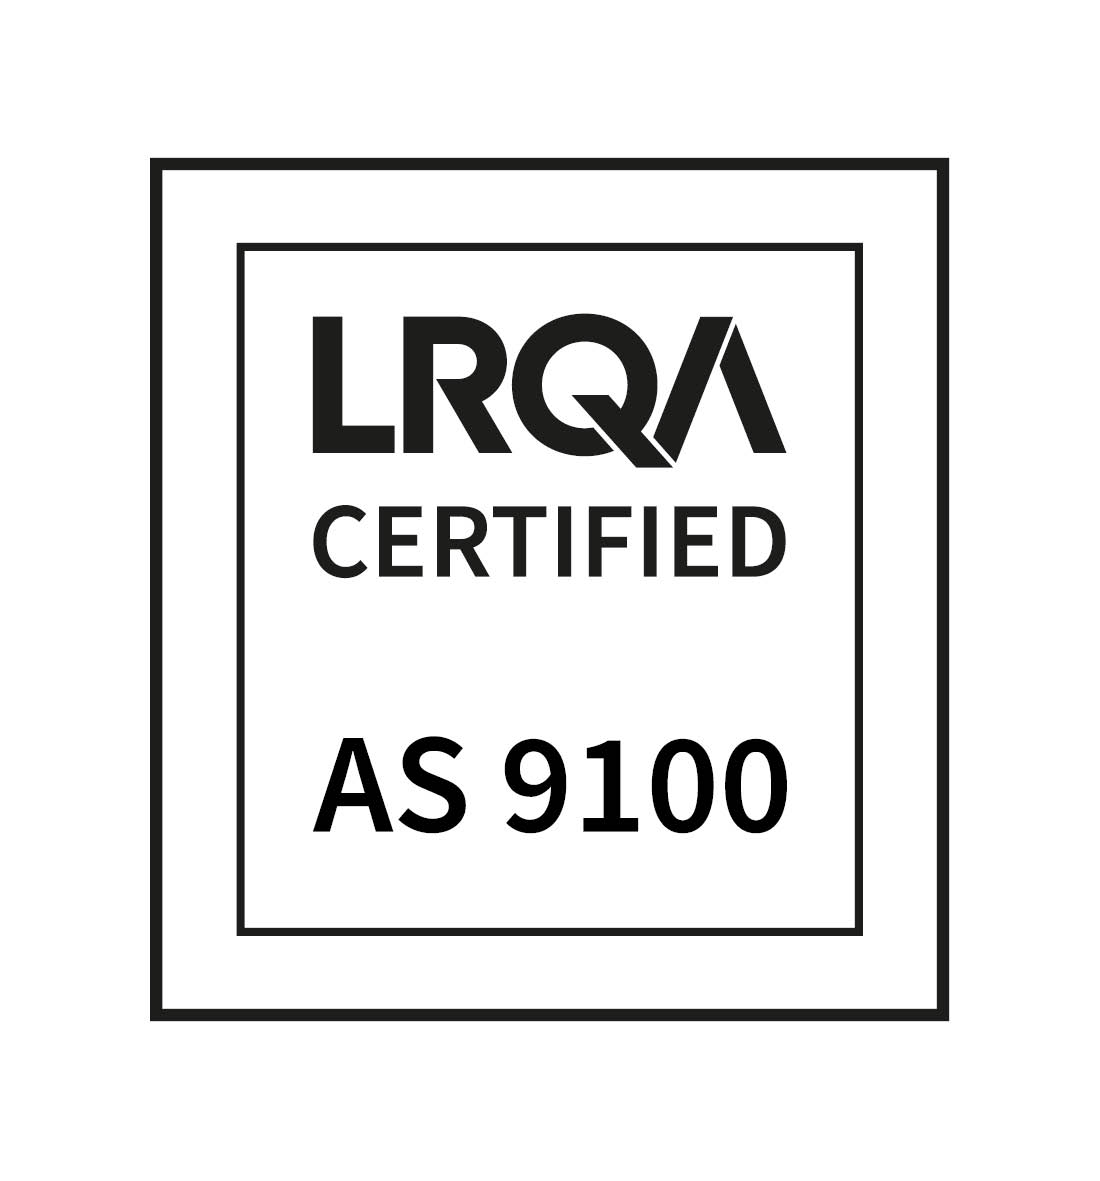 certification ISO 9100